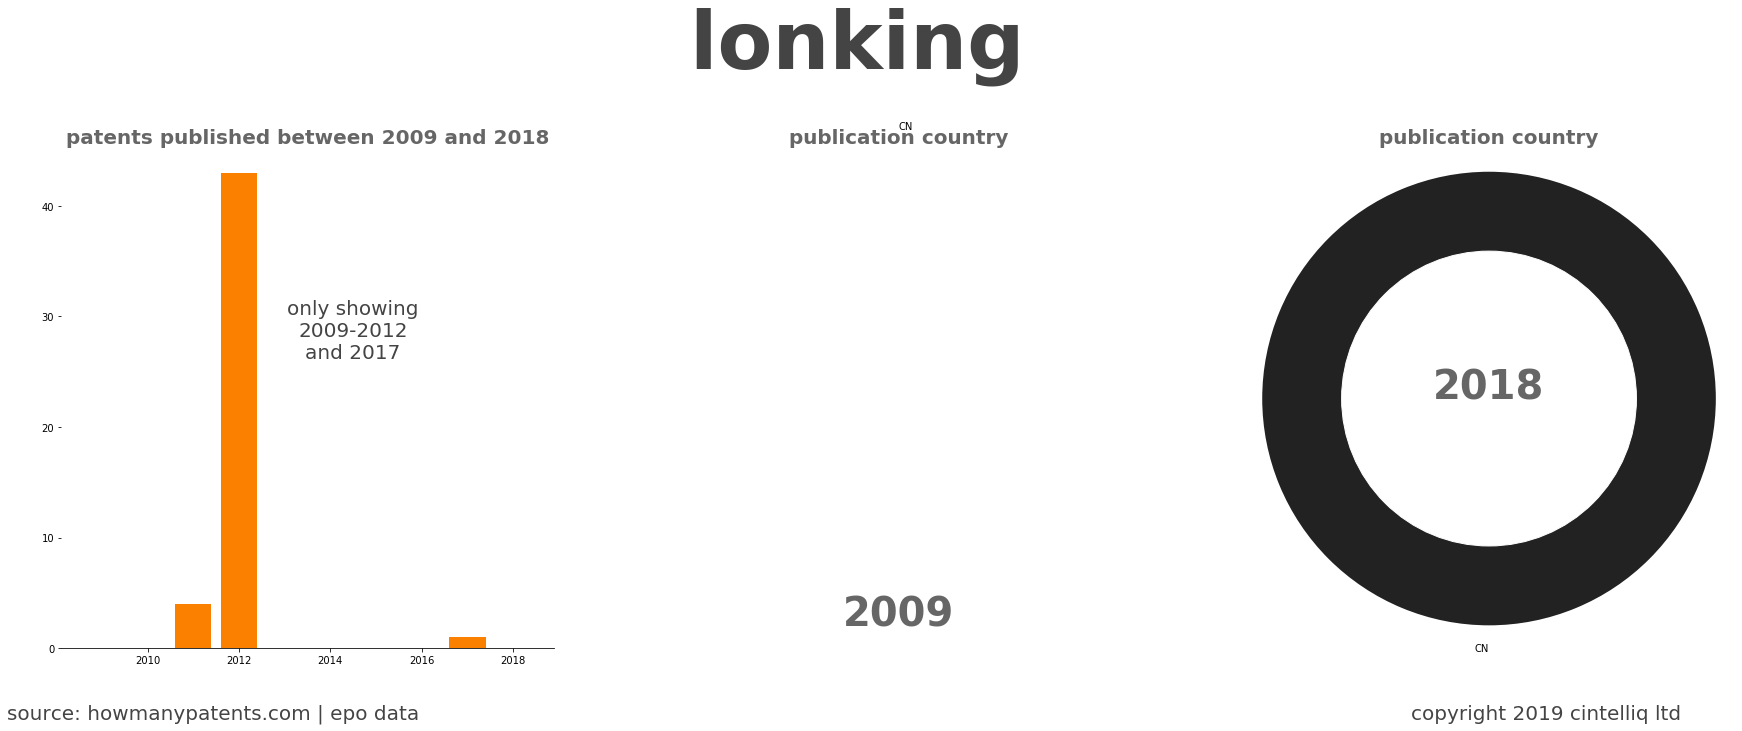 summary of patents for Lonking 